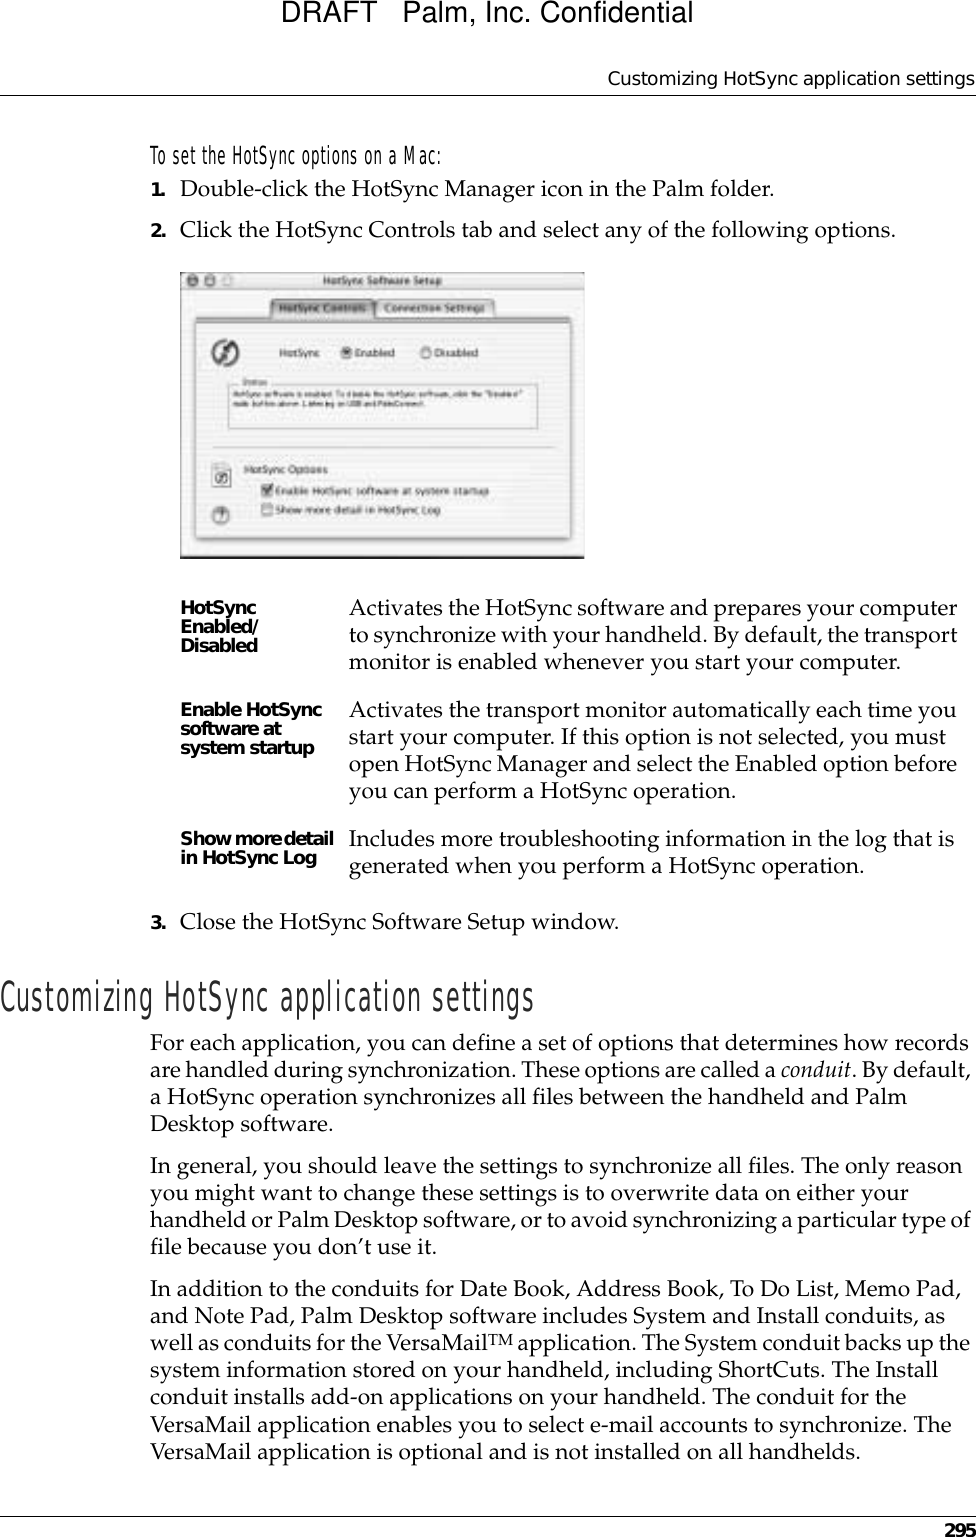 Customizing HotSync application settings295To set the HotSync options on a Mac:1. Double-click the HotSync Manager icon in the Palm folder.2. Click the HotSync Controls tab and select any of the following options.3. Close the HotSync Software Setup window. Customizing HotSync application settingsFor each application, you can define a set of options that determines how records are handled during synchronization. These options are called a conduit. By default, a HotSync operation synchronizes all files between the handheld and Palm Desktop software. In general, you should leave the settings to synchronize all files. The only reason you might want to change these settings is to overwrite data on either your handheld or Palm Desktop software, or to avoid synchronizing a particular type of file because you don’t use it.In addition to the conduits for Date Book, Address Book, To Do List, Memo Pad, and Note Pad, Palm Desktop software includes System and Install conduits, as well as conduits for the VersaMailTM application. The System conduit backs up the system information stored on your handheld, including ShortCuts. The Install conduit installs add-on applications on your handheld. The conduit for the VersaMail application enables you to select e-mail accounts to synchronize. The VersaMail application is optional and is not installed on all handhelds.HotSync Enabled/DisabledActivates the HotSync software and prepares your computer to synchronize with your handheld. By default, the transport monitor is enabled whenever you start your computer. Enable HotSync software at system startupActivates the transport monitor automatically each time you start your computer. If this option is not selected, you must open HotSync Manager and select the Enabled option before you can perform a HotSync operation.Show more detail in HotSync Log Includes more troubleshooting information in the log that is generated when you perform a HotSync operation.DRAFT   Palm, Inc. Confidential